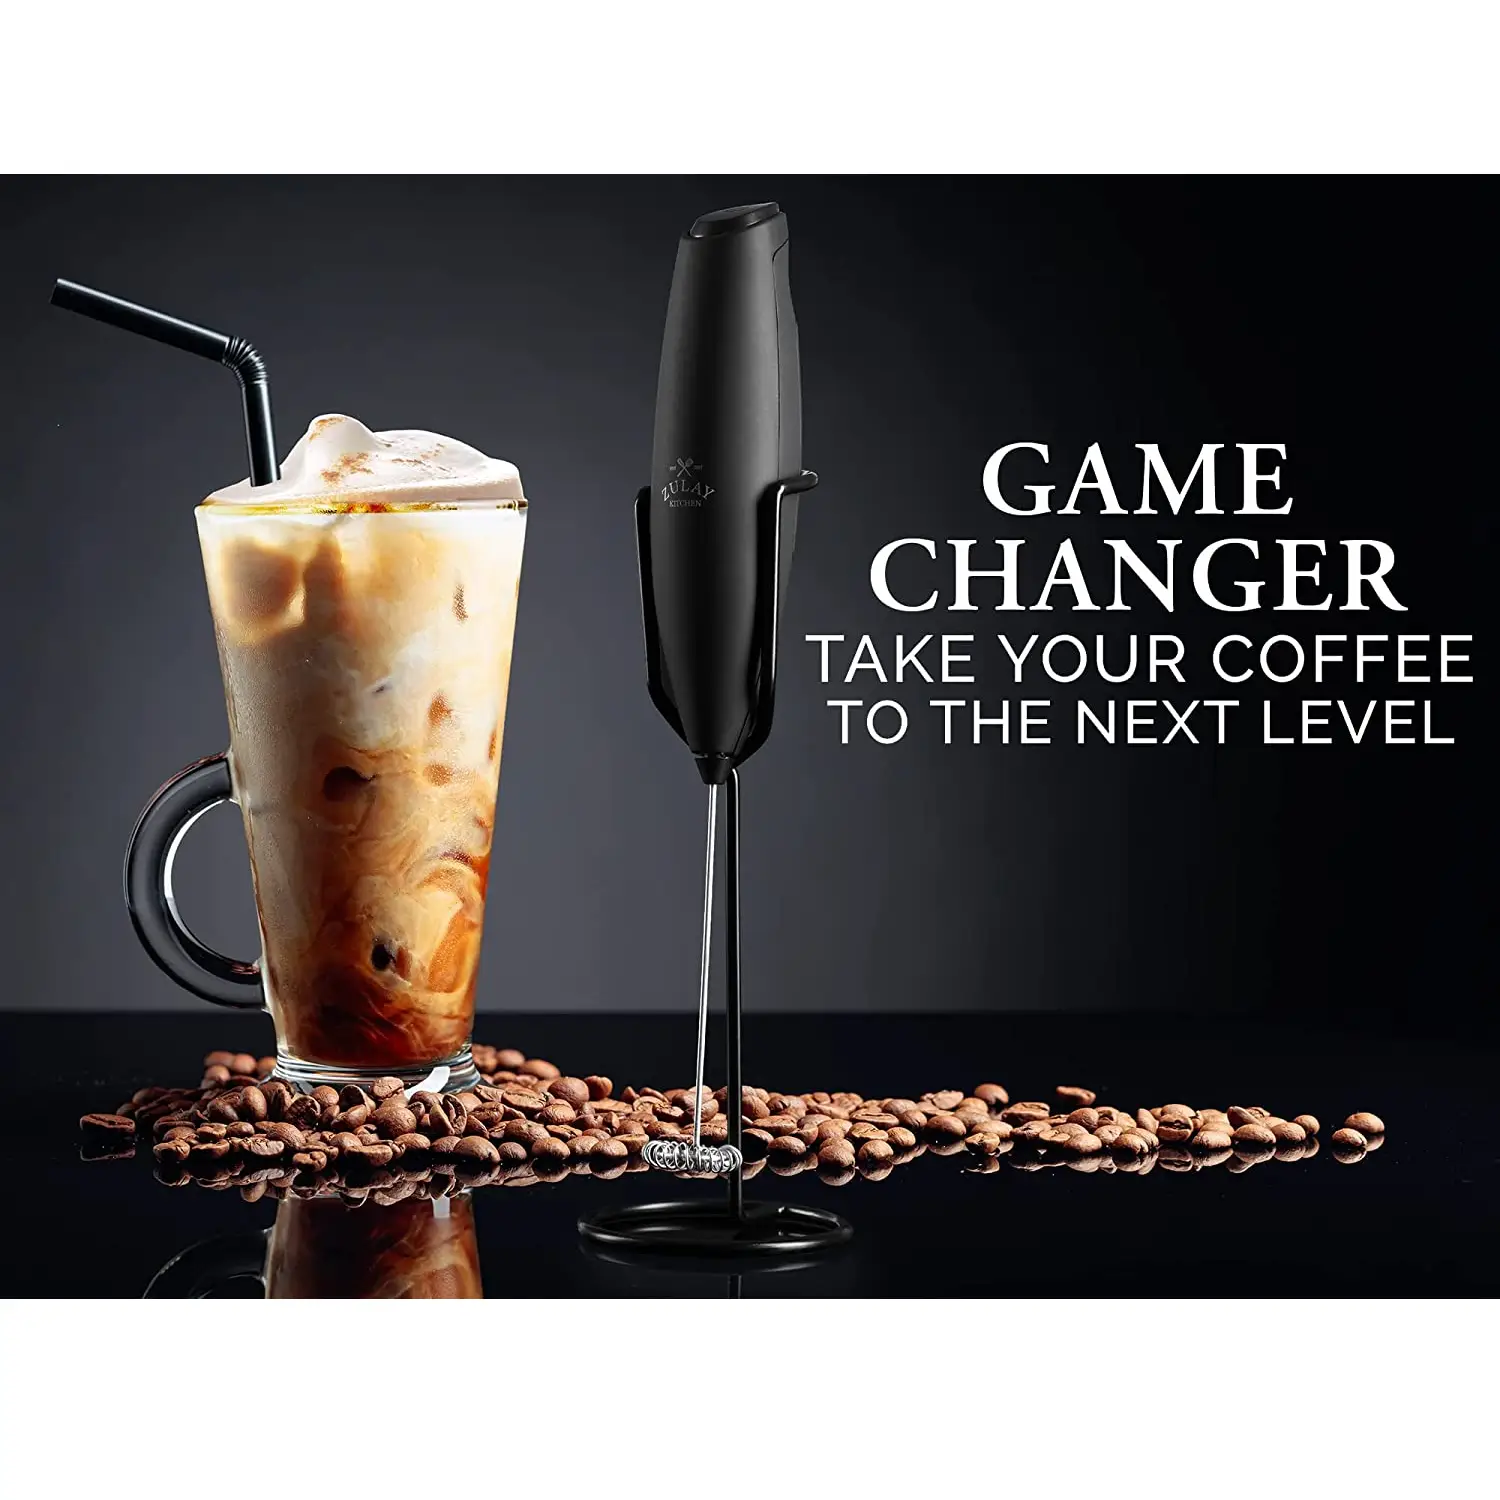 Zulay Executive Series Ultra Premium Gift Milk Frother For Coffee With Improved Stand